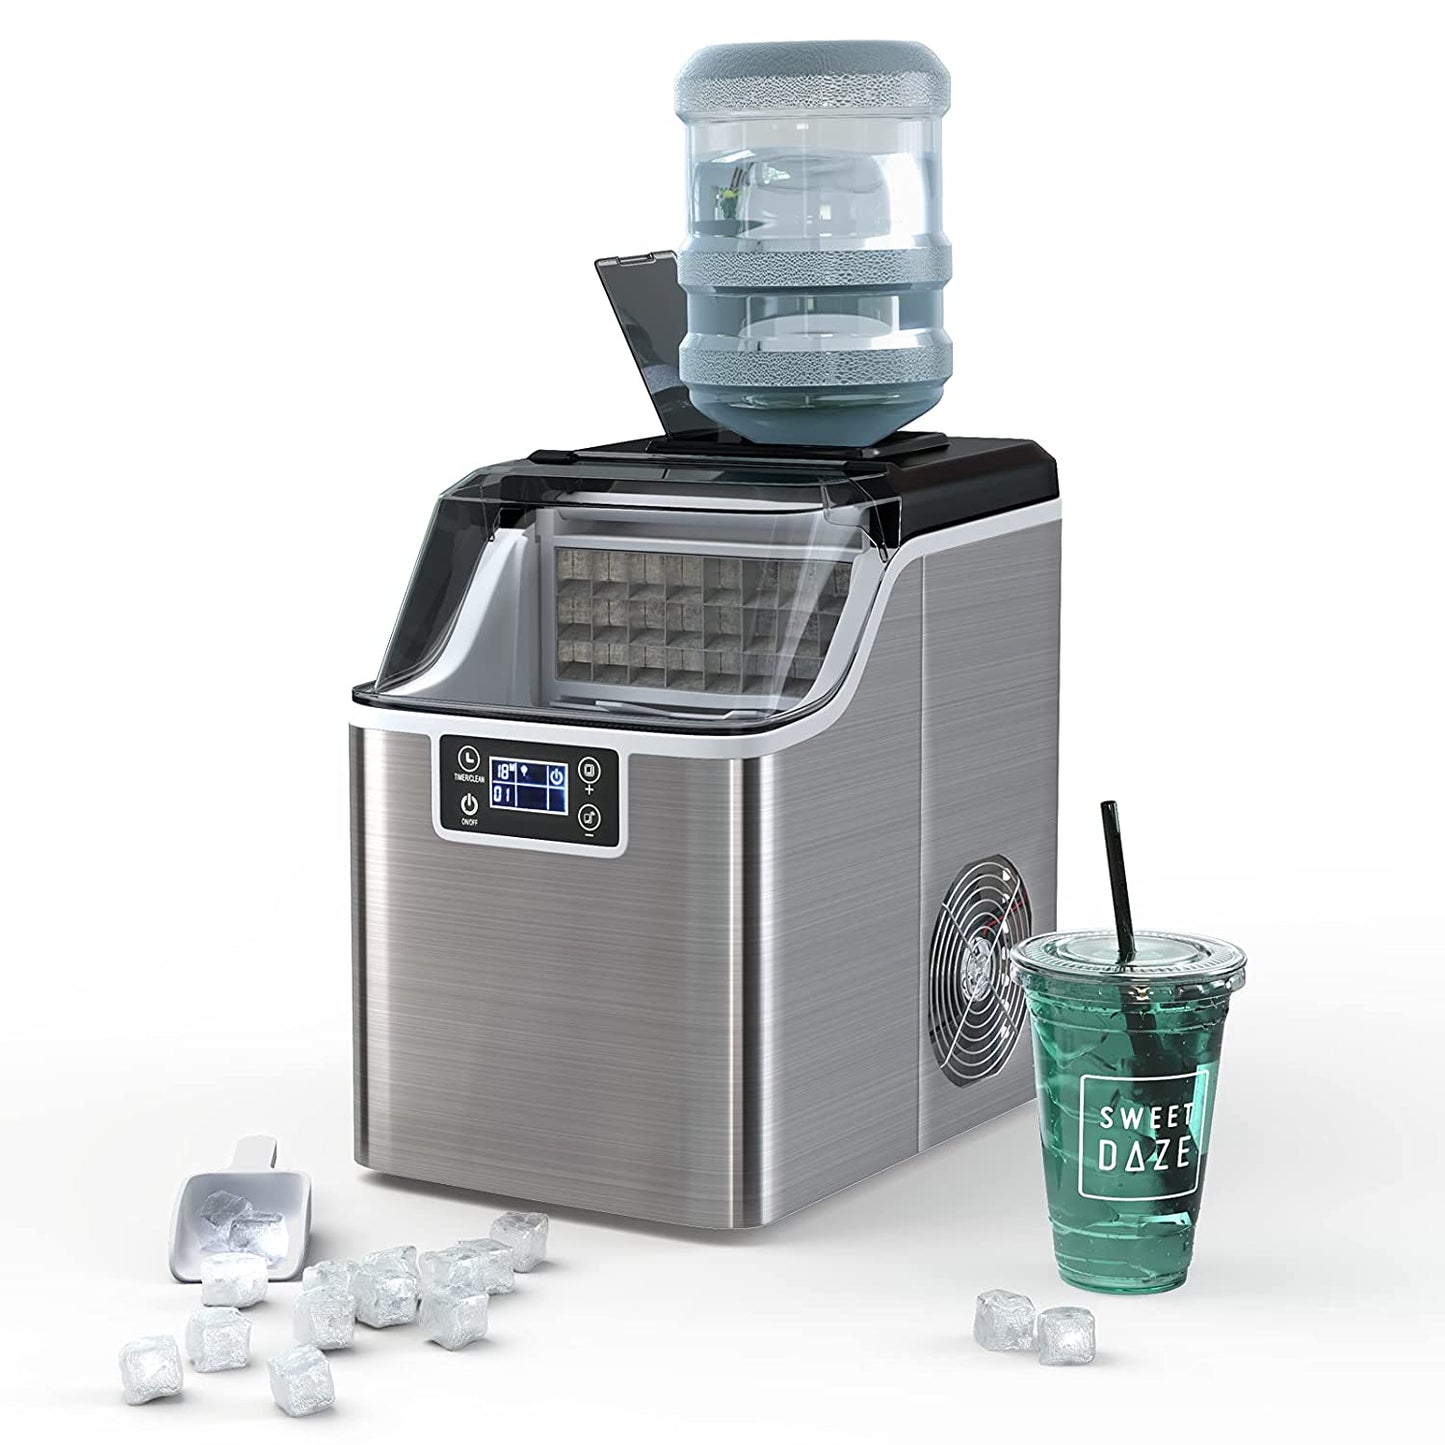 Portable Countertop Ice Maker with Auto Self-Cleaning Function, Rapid Ice Production - 40LBS/24H, Top Inlet Hole, Includes Ice Scoop and Basket - Ideal for Home, Office, and Party Use